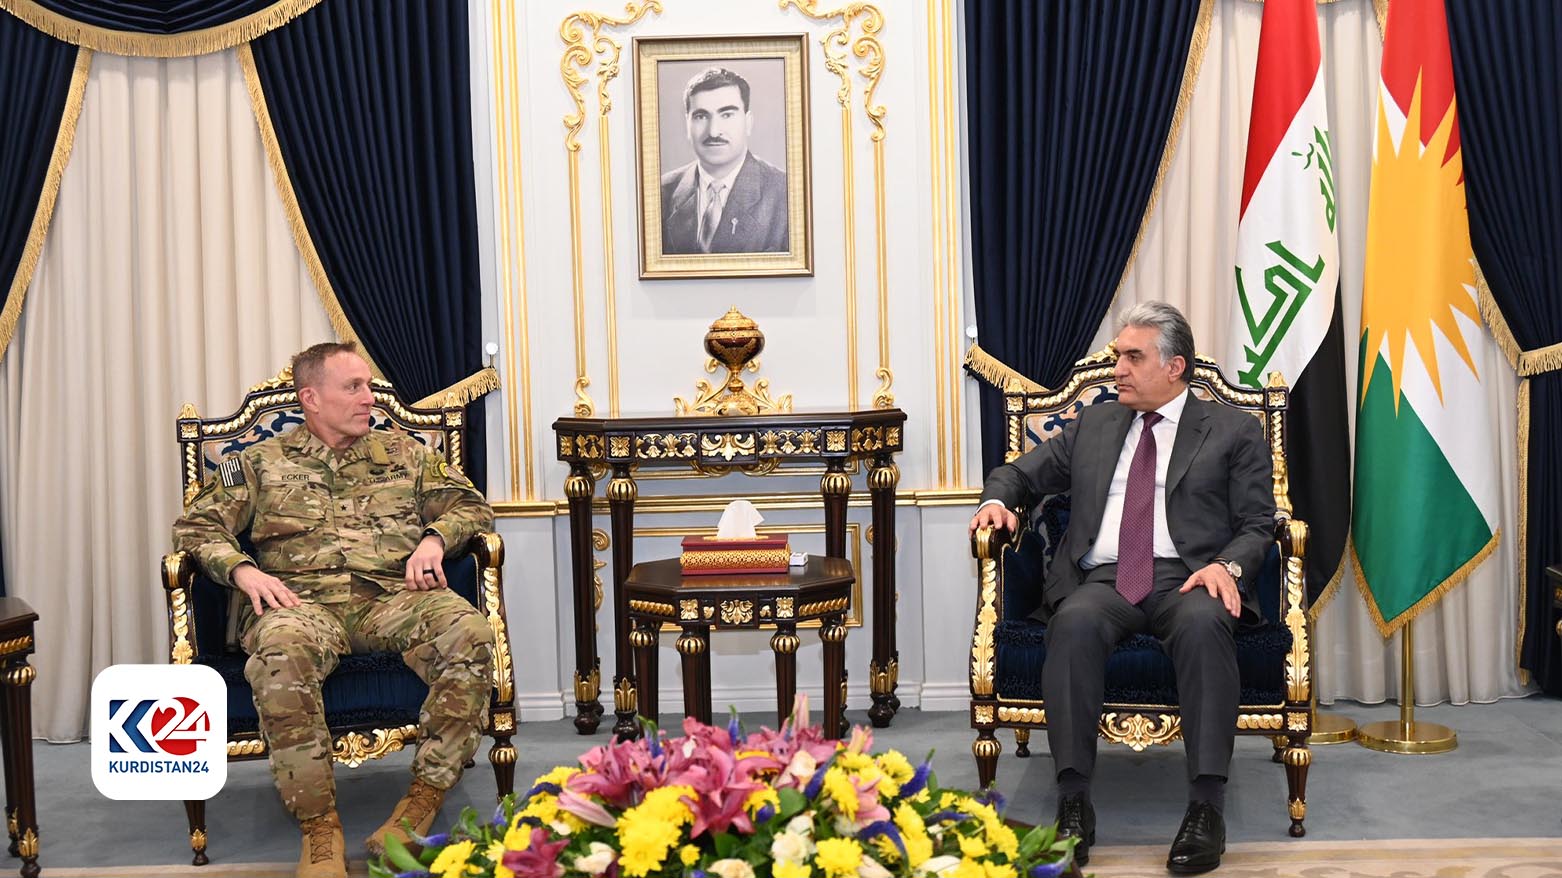 KRG Interior Minister Coalition commander discuss War on ISIS